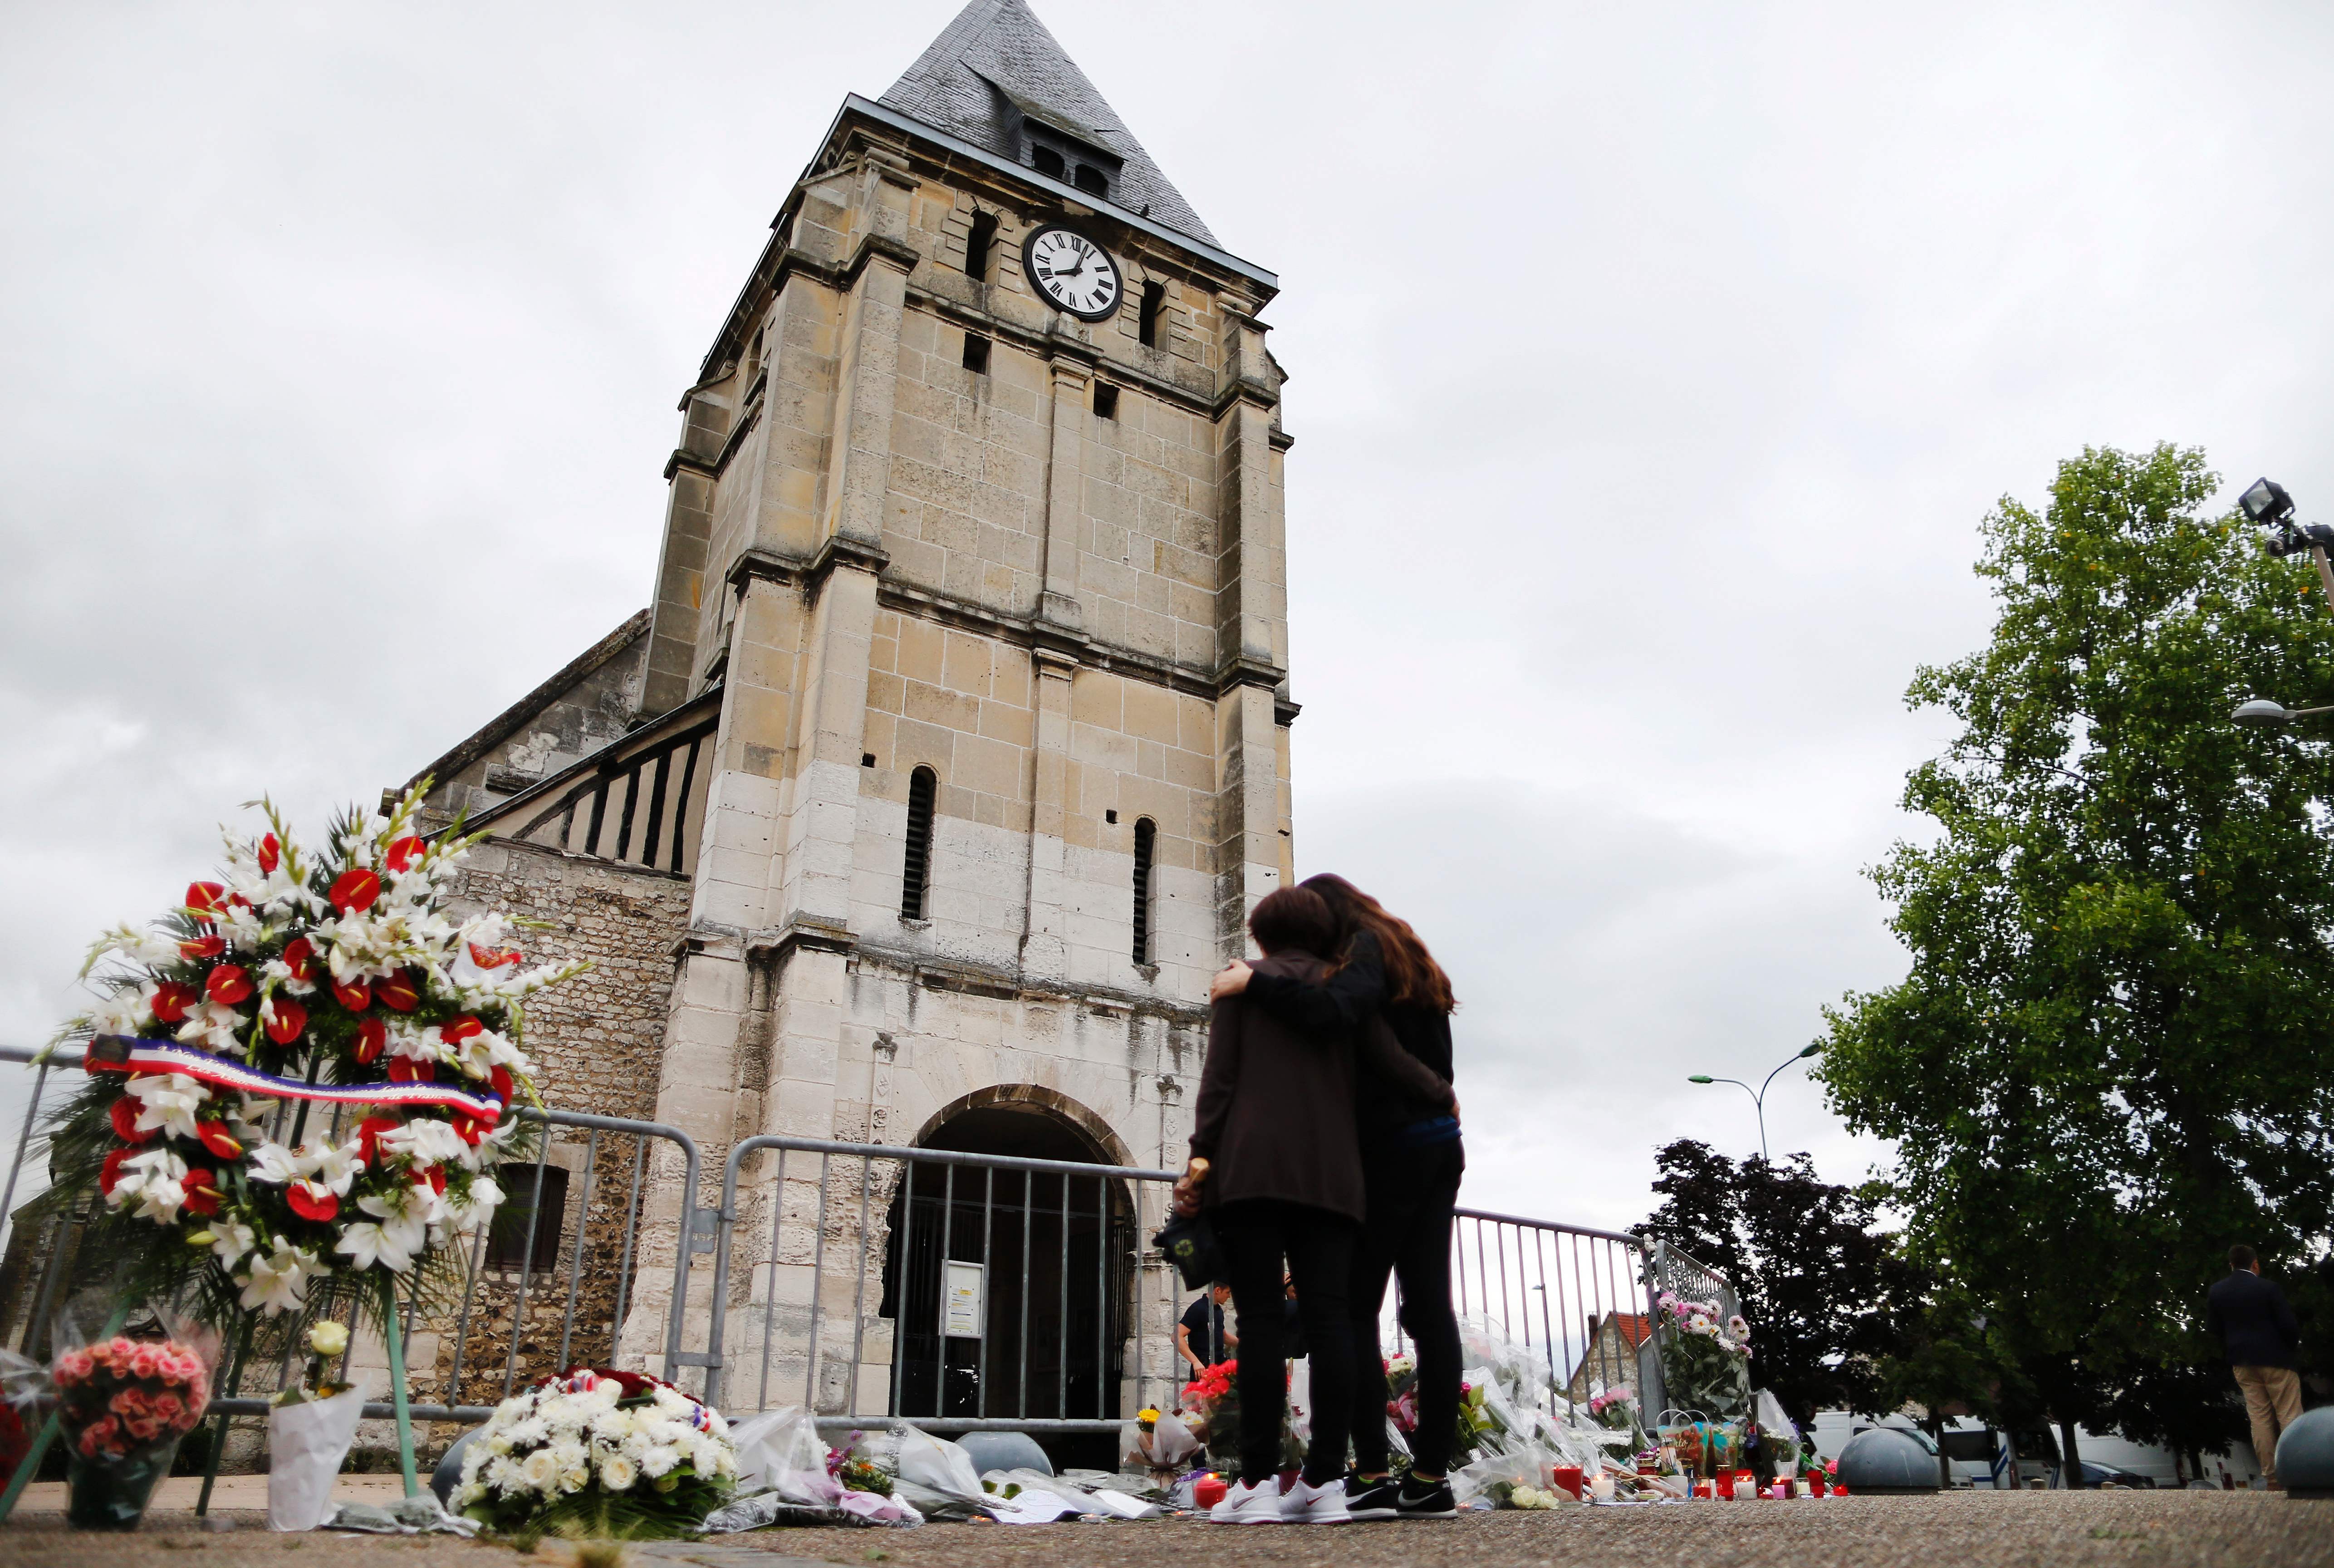 French government faces security criticisms after church attack